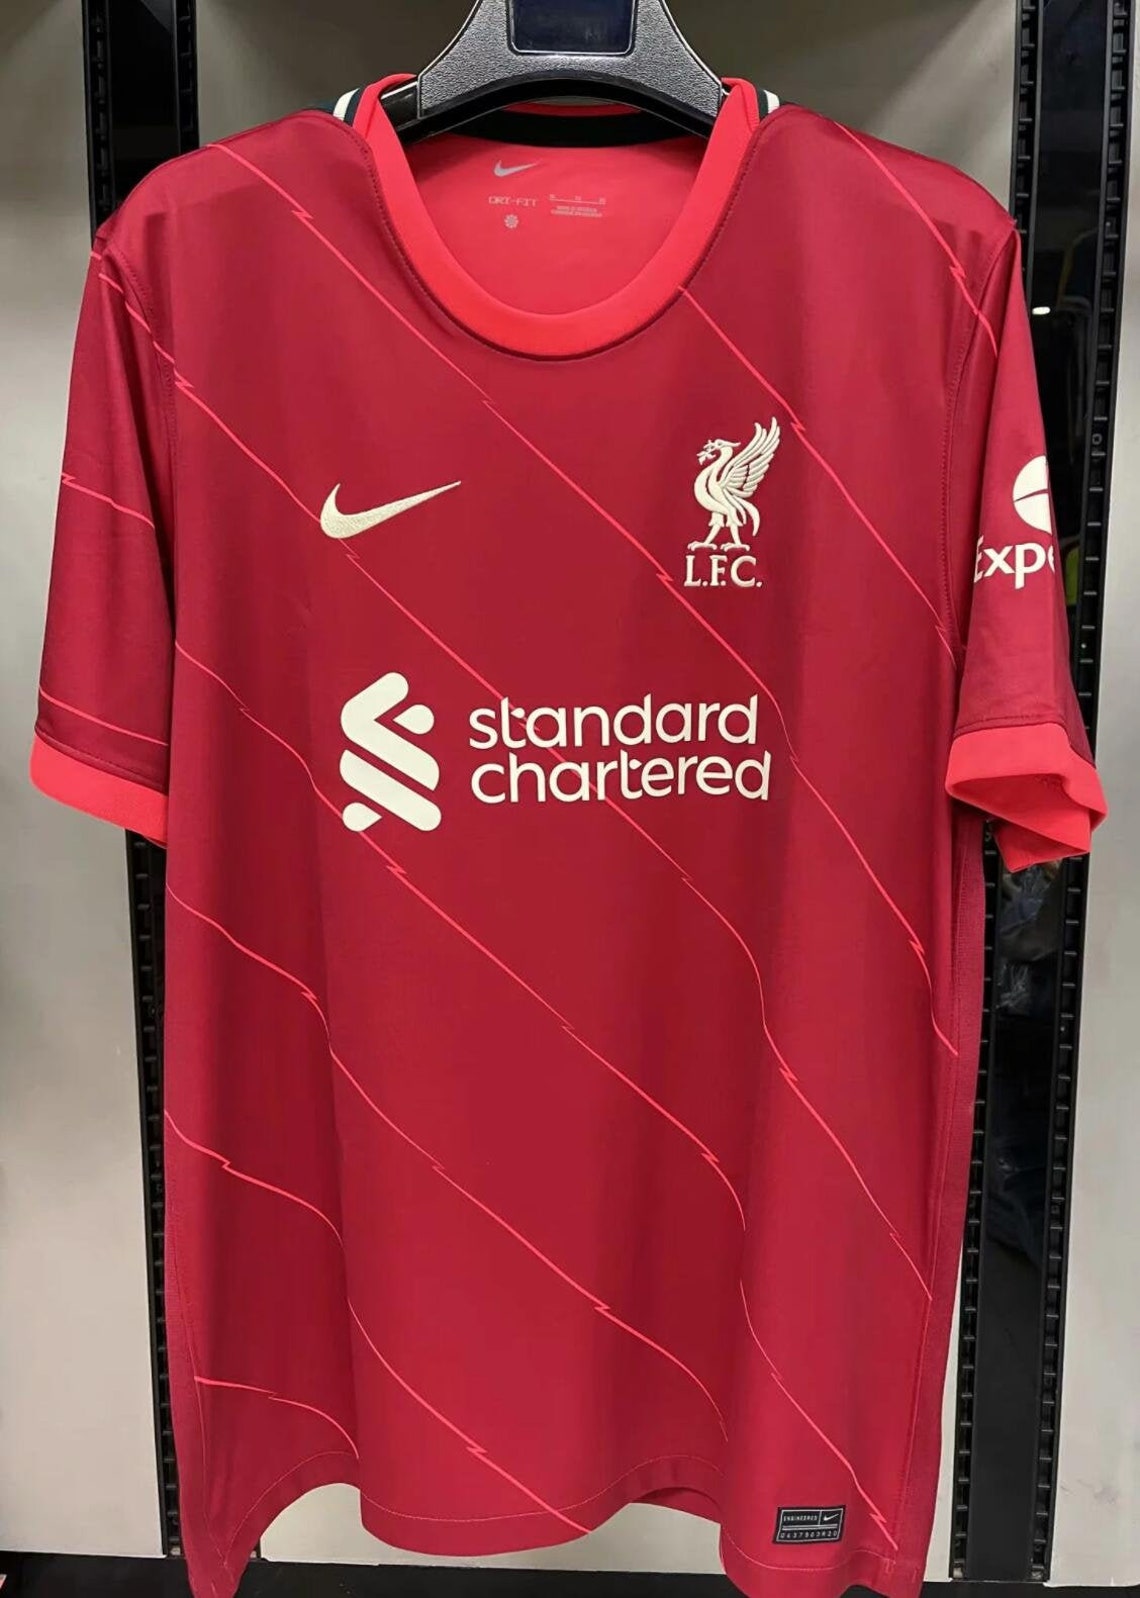 NEW Liverpool FC 2021/22 Home Shirt Any Size S-XXL | Etsy